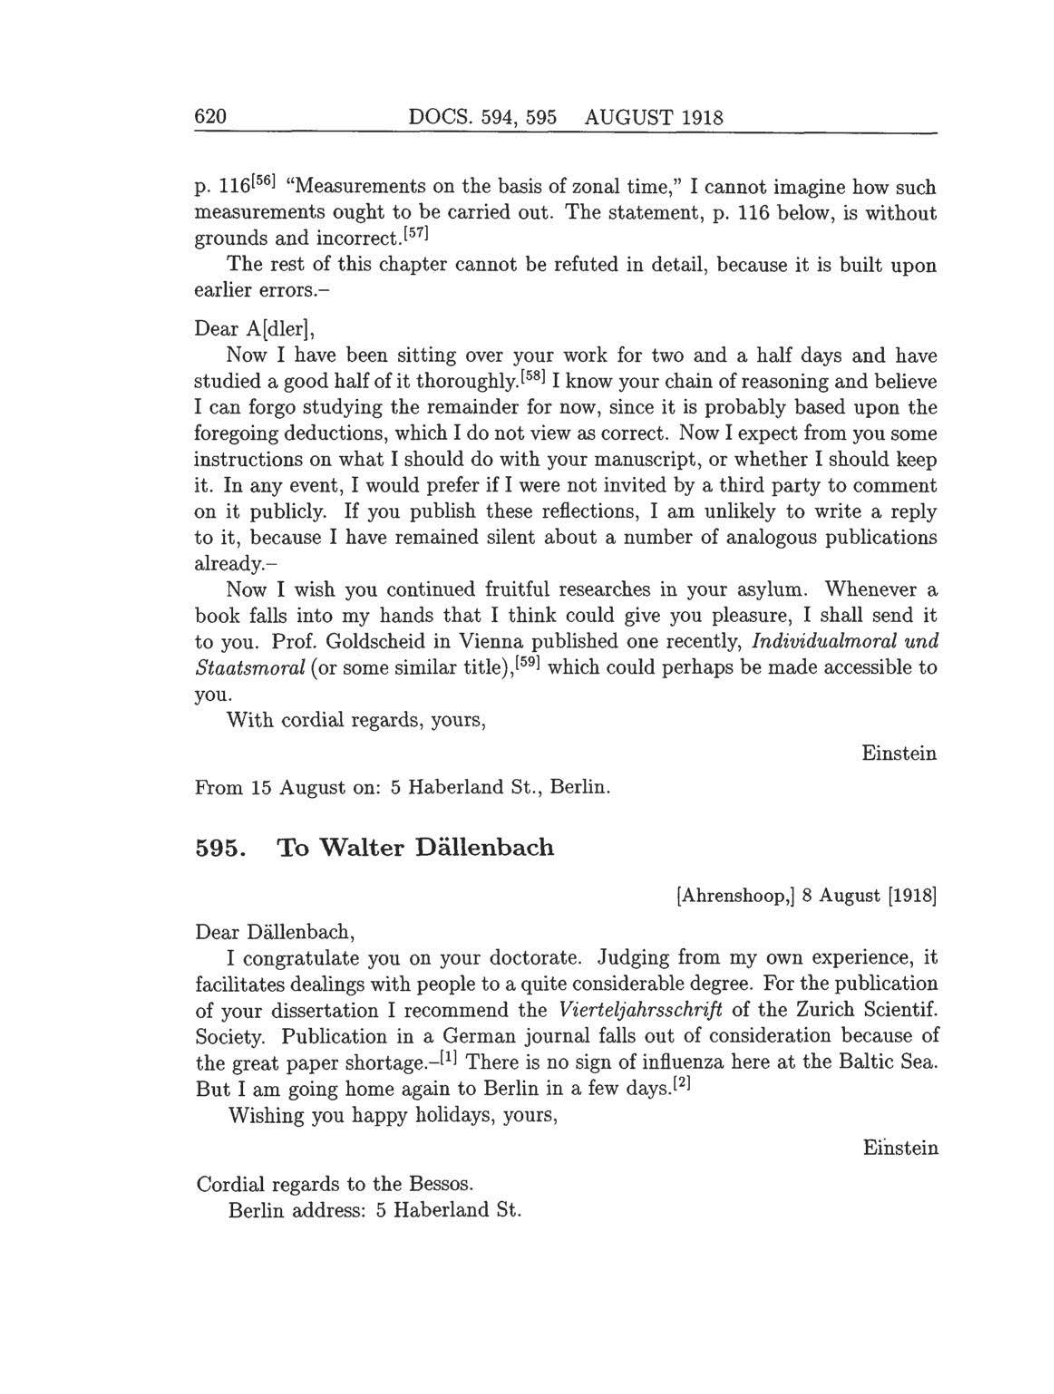 Volume 8: The Berlin Years: Correspondence, 1914-1918 (English translation supplement) page 620